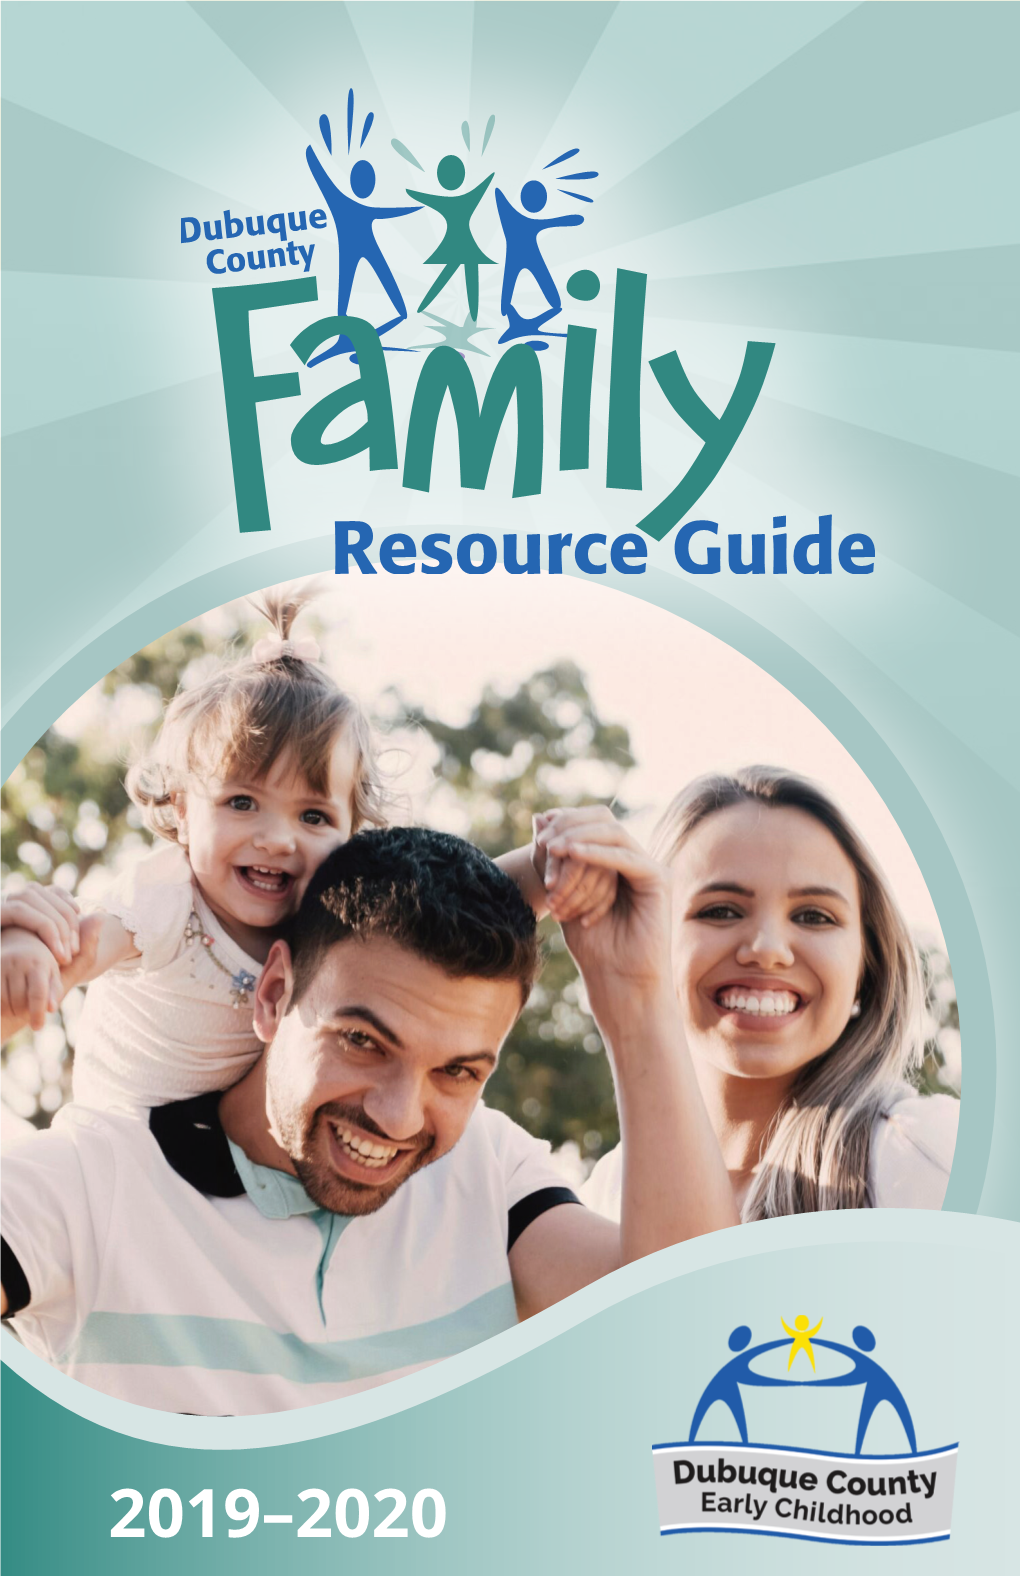 Dubuque County Family Resource Guide 1 2 Dubuque County Family Resource Guide Table of Contents